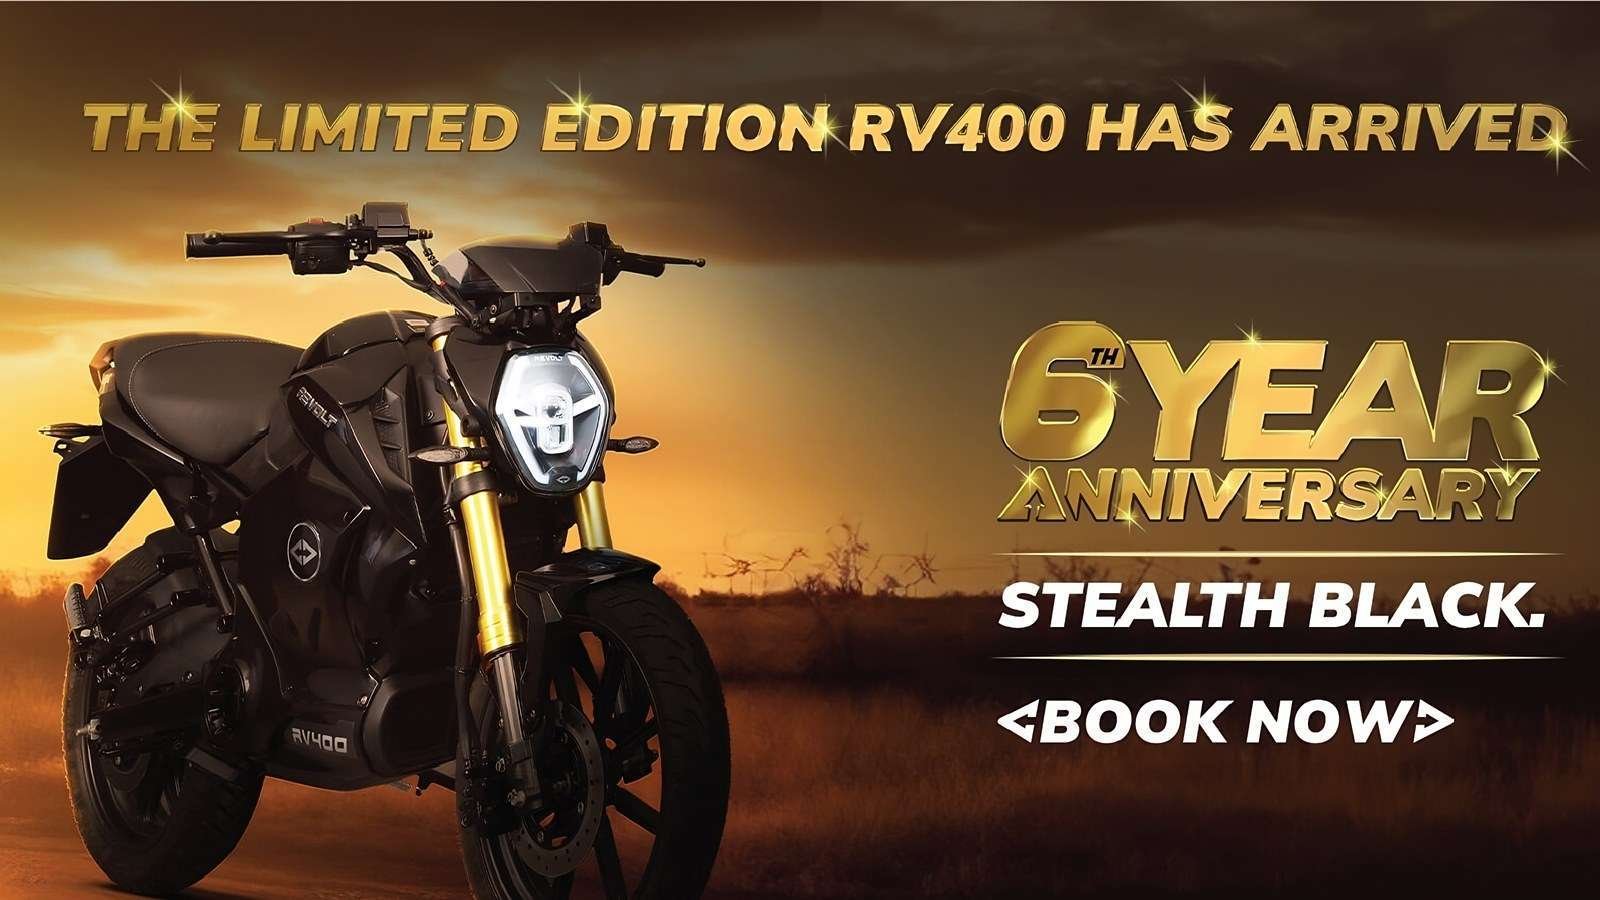 Revolt Limited Edition Stealth Black RV400 Electric Motorcycle launched